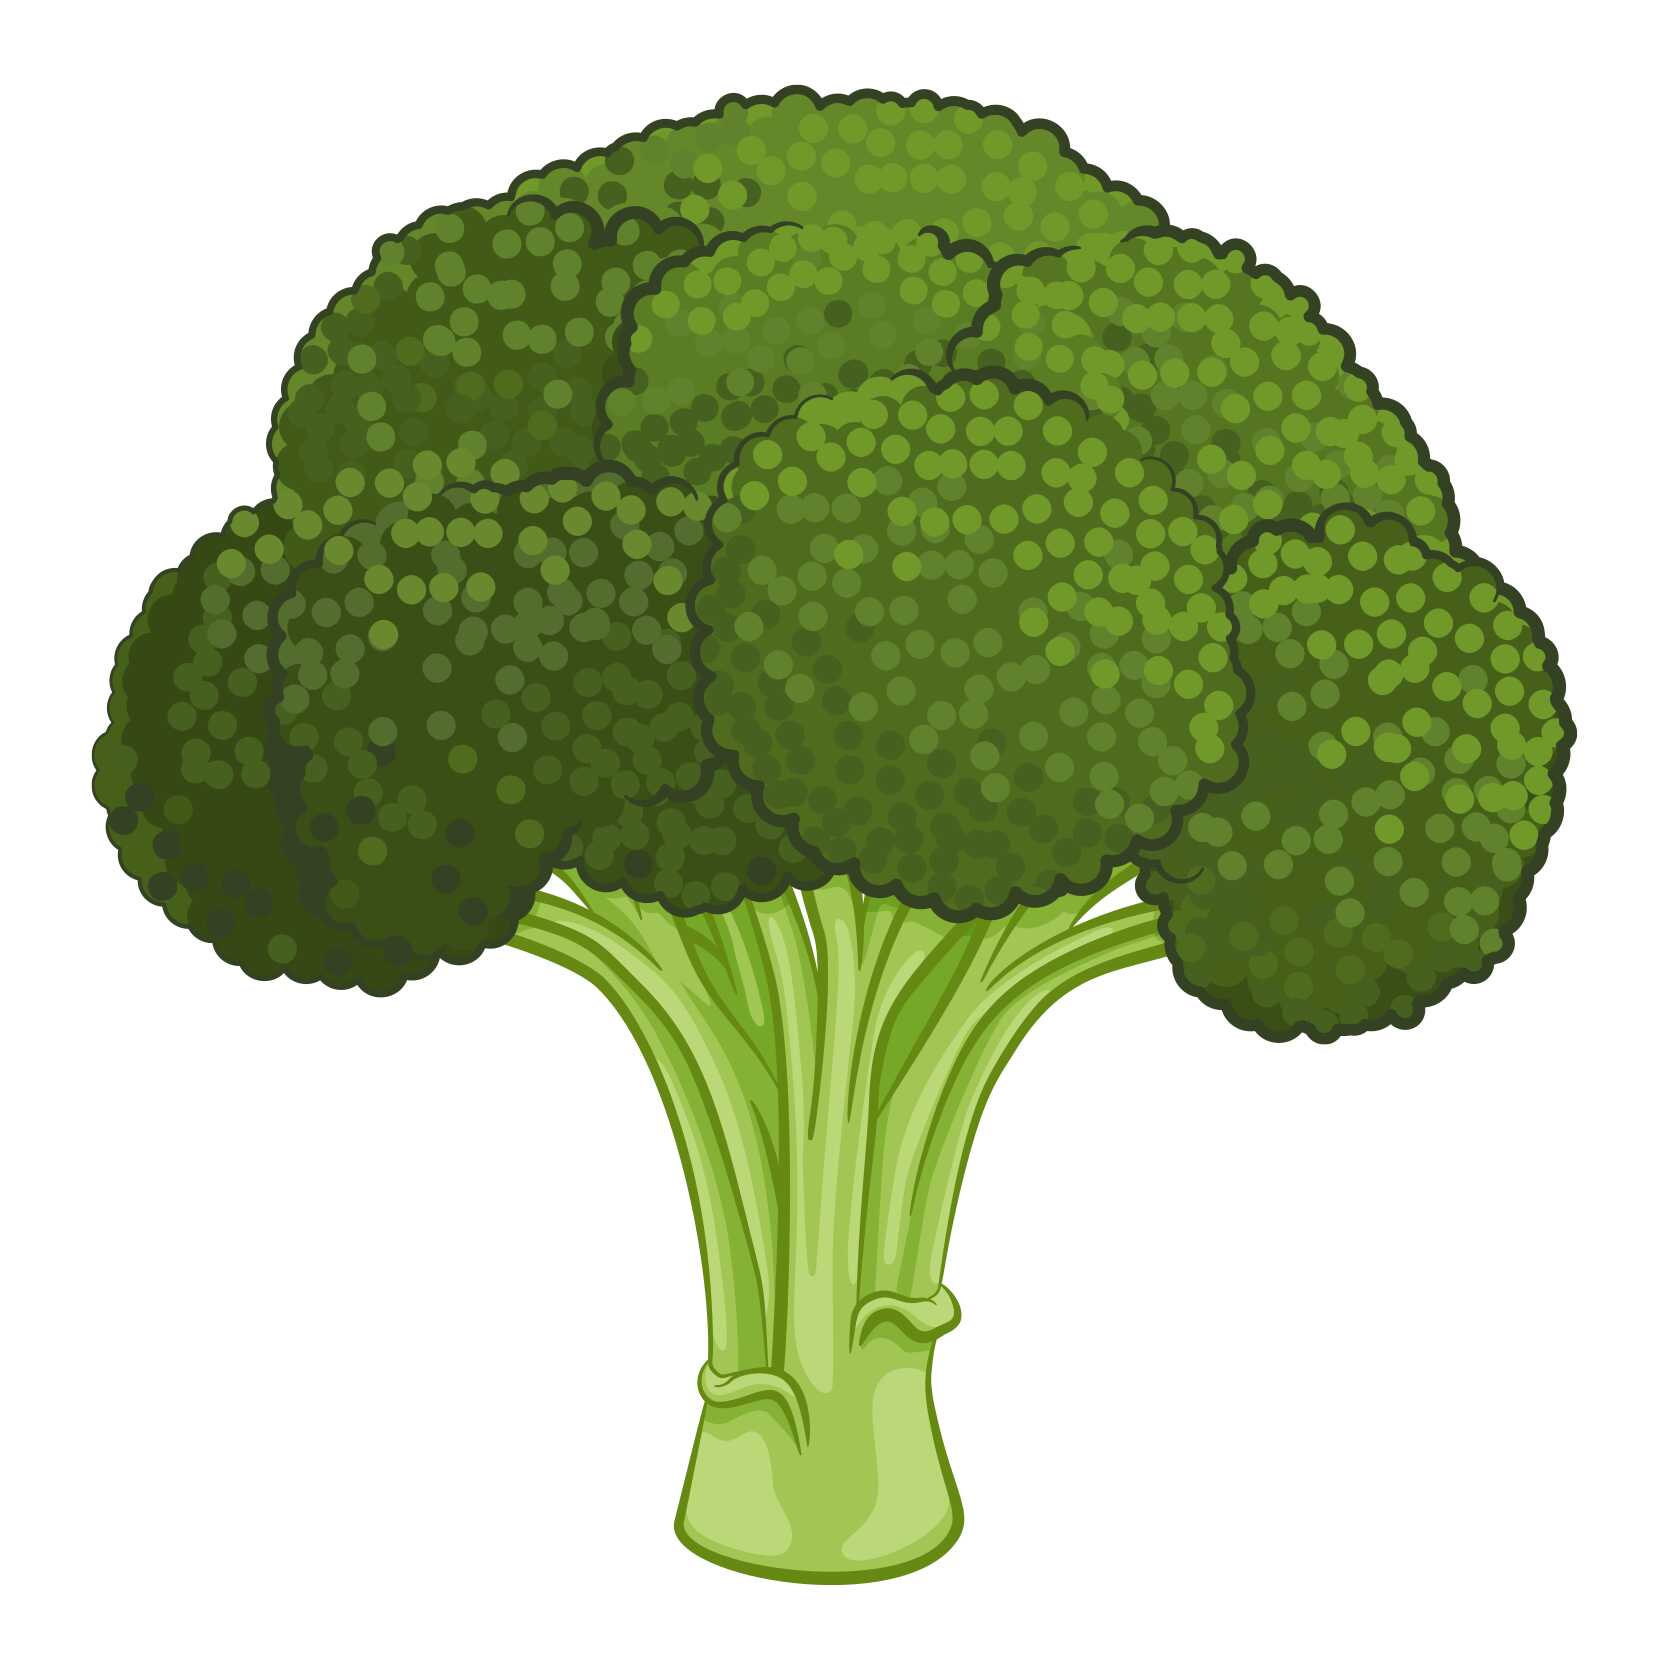 English vocabulary with pictures - Vegetables - Broccoli